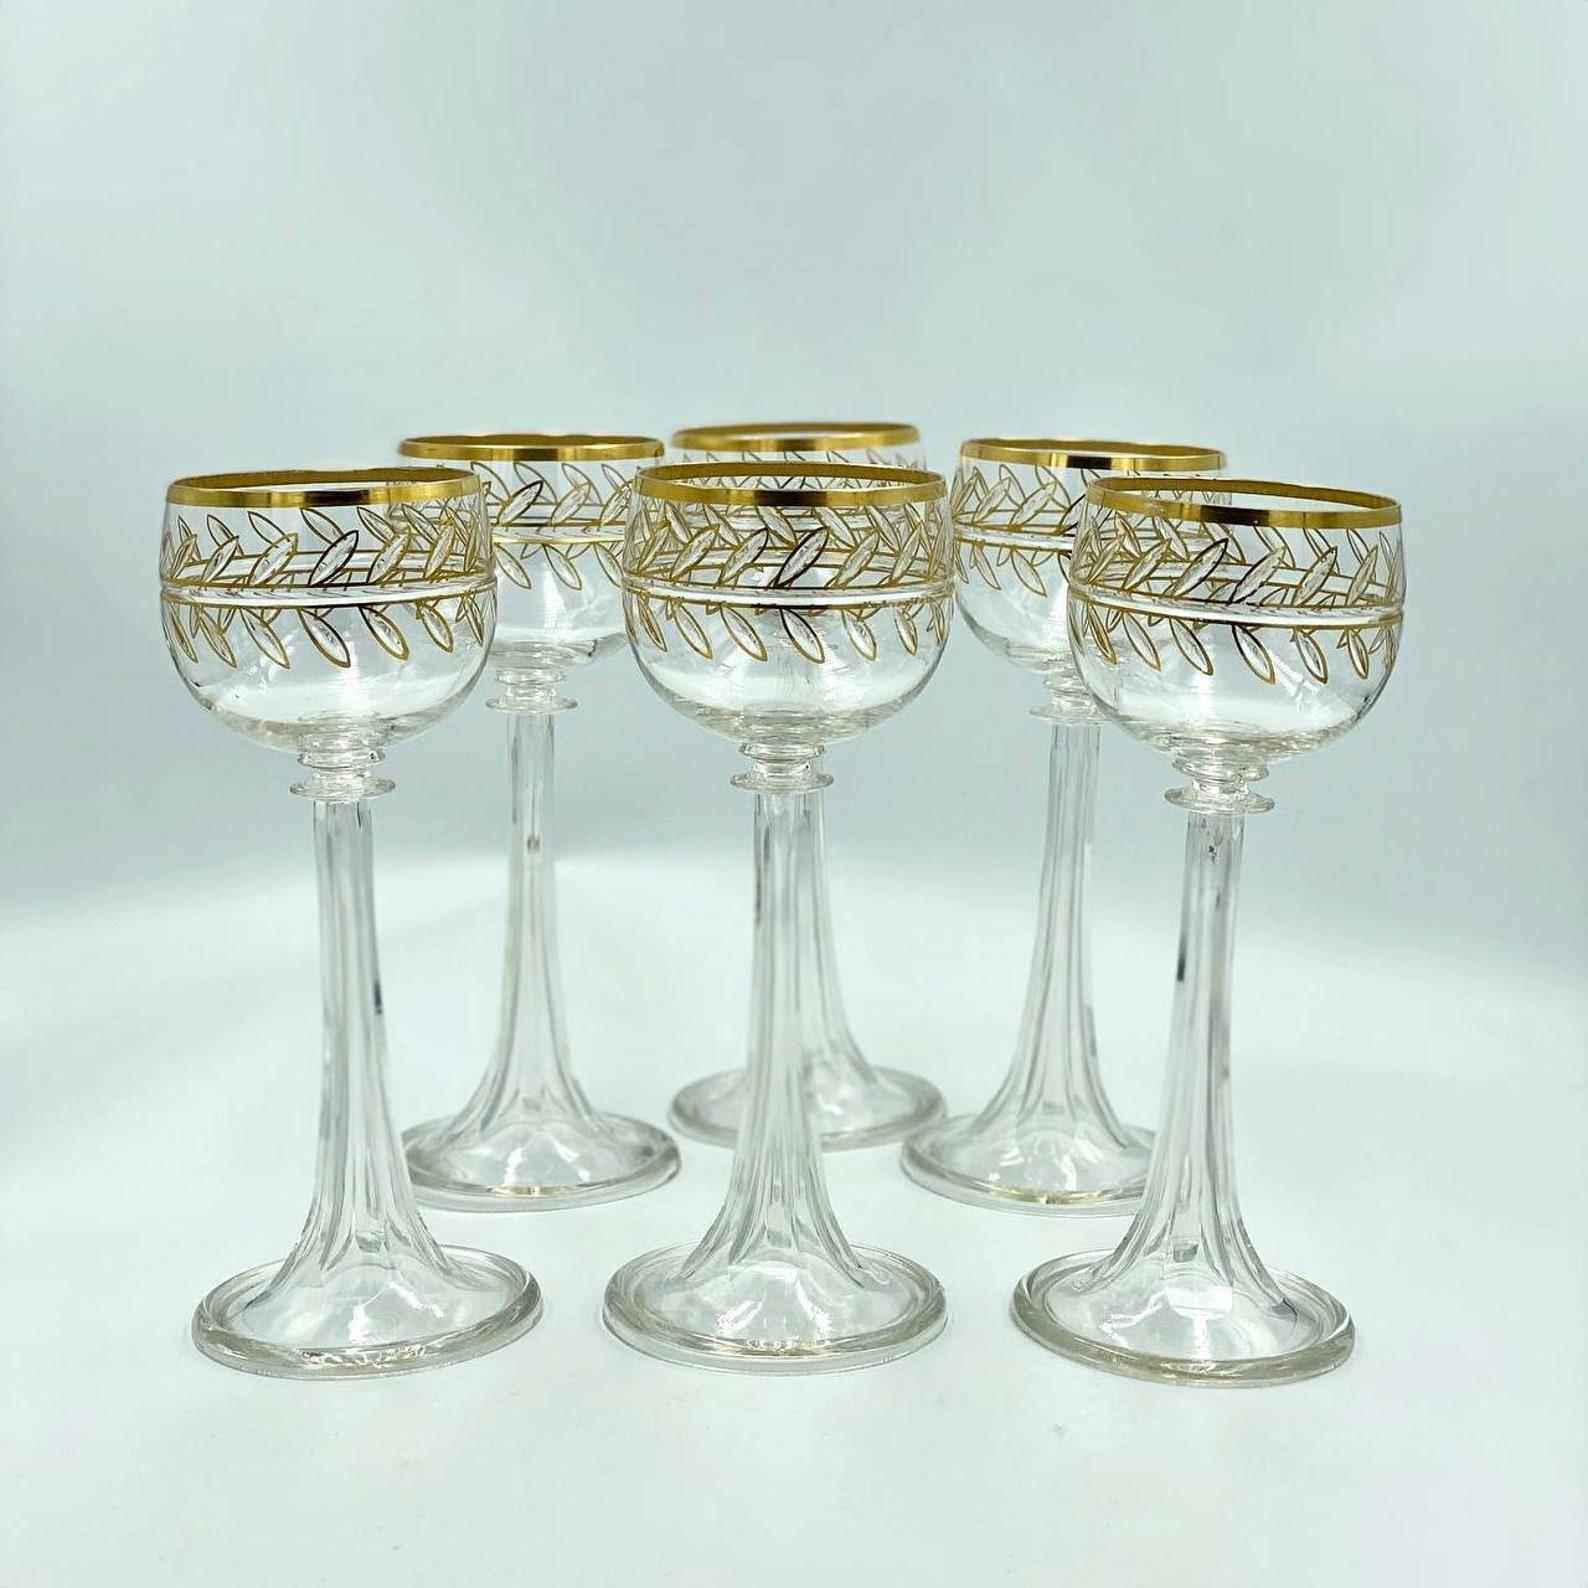 Crystal Gold Rimmed Champagne Glasses, Wine Glasses 6-pc Set, 24K Gold, 1900s'.

 Crystal glassware is made from high quality translucent and durable material. 

 Handcrafted and designed by passionate artists, these glasses feature sophisticated